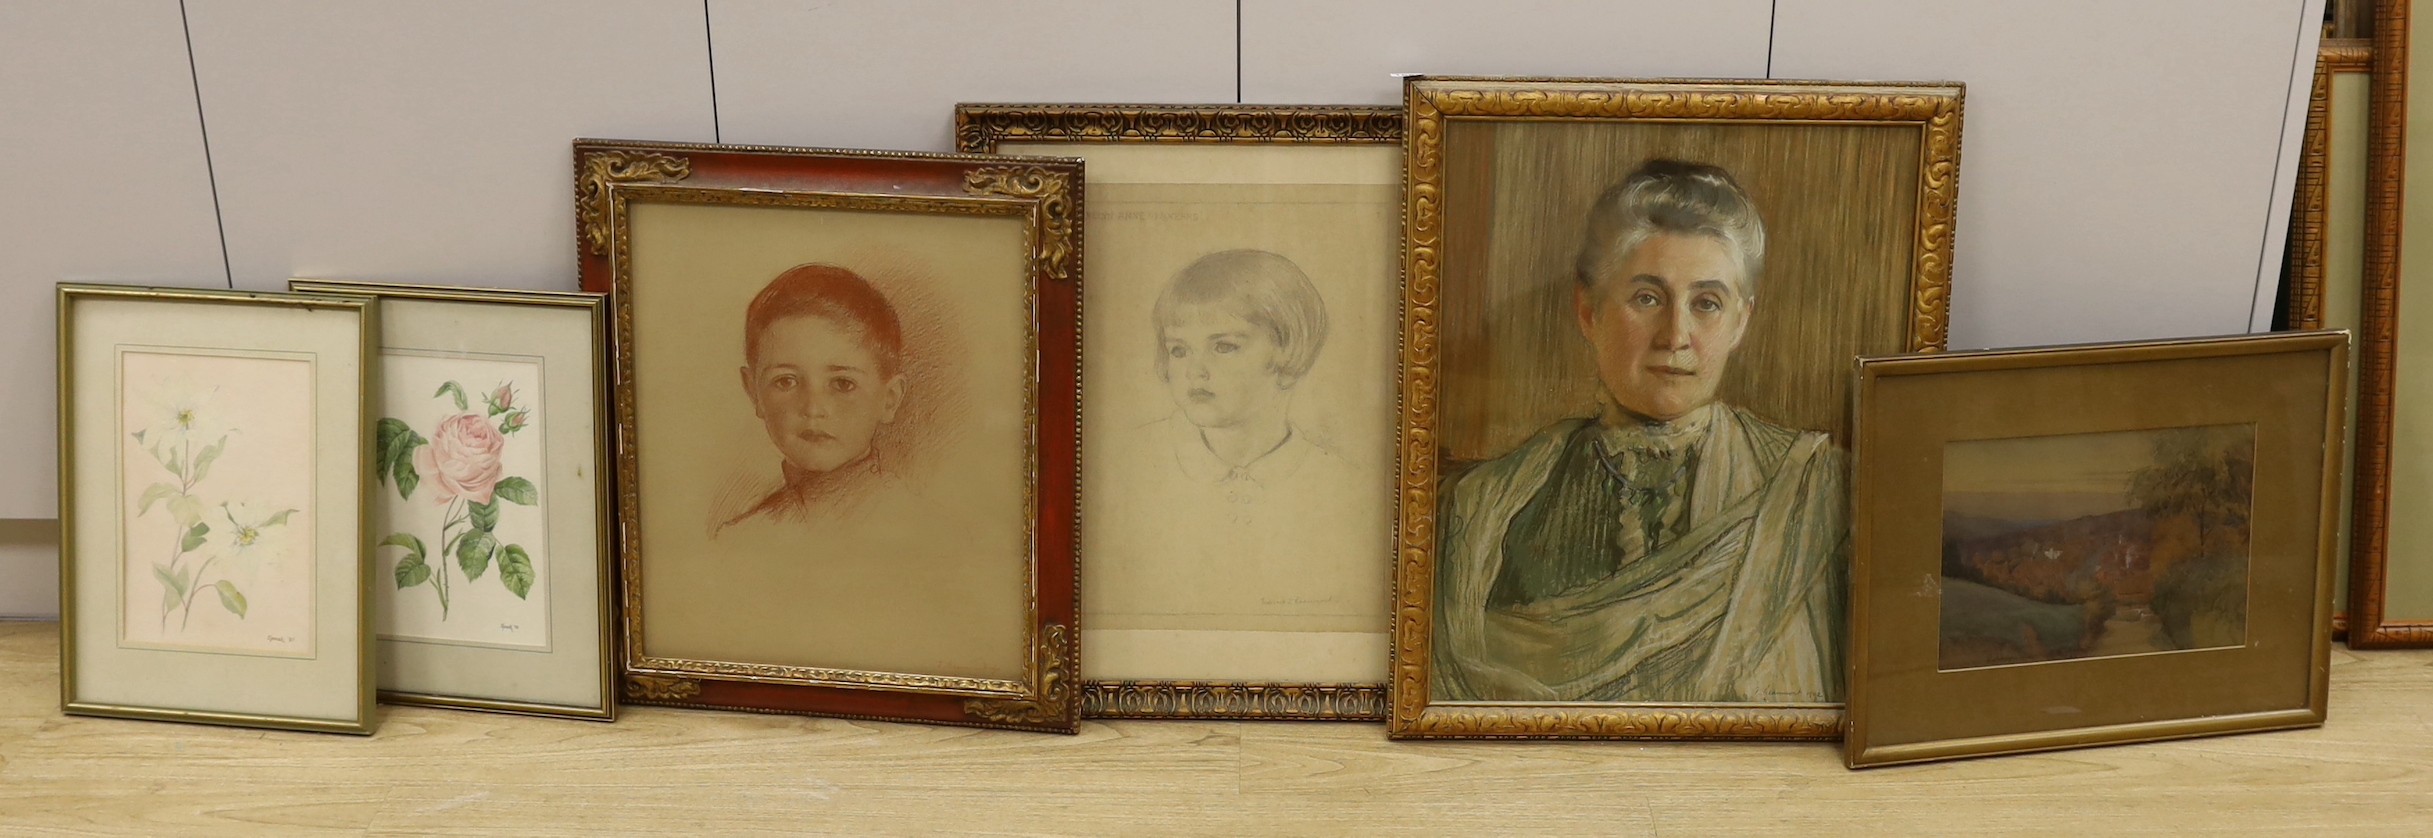 Frederick Samuel Beaumont (1833-1899), three pencil and watercolour sketches, head studies, all signed and two dated 1902 and 1911, largest 57 x 42cm